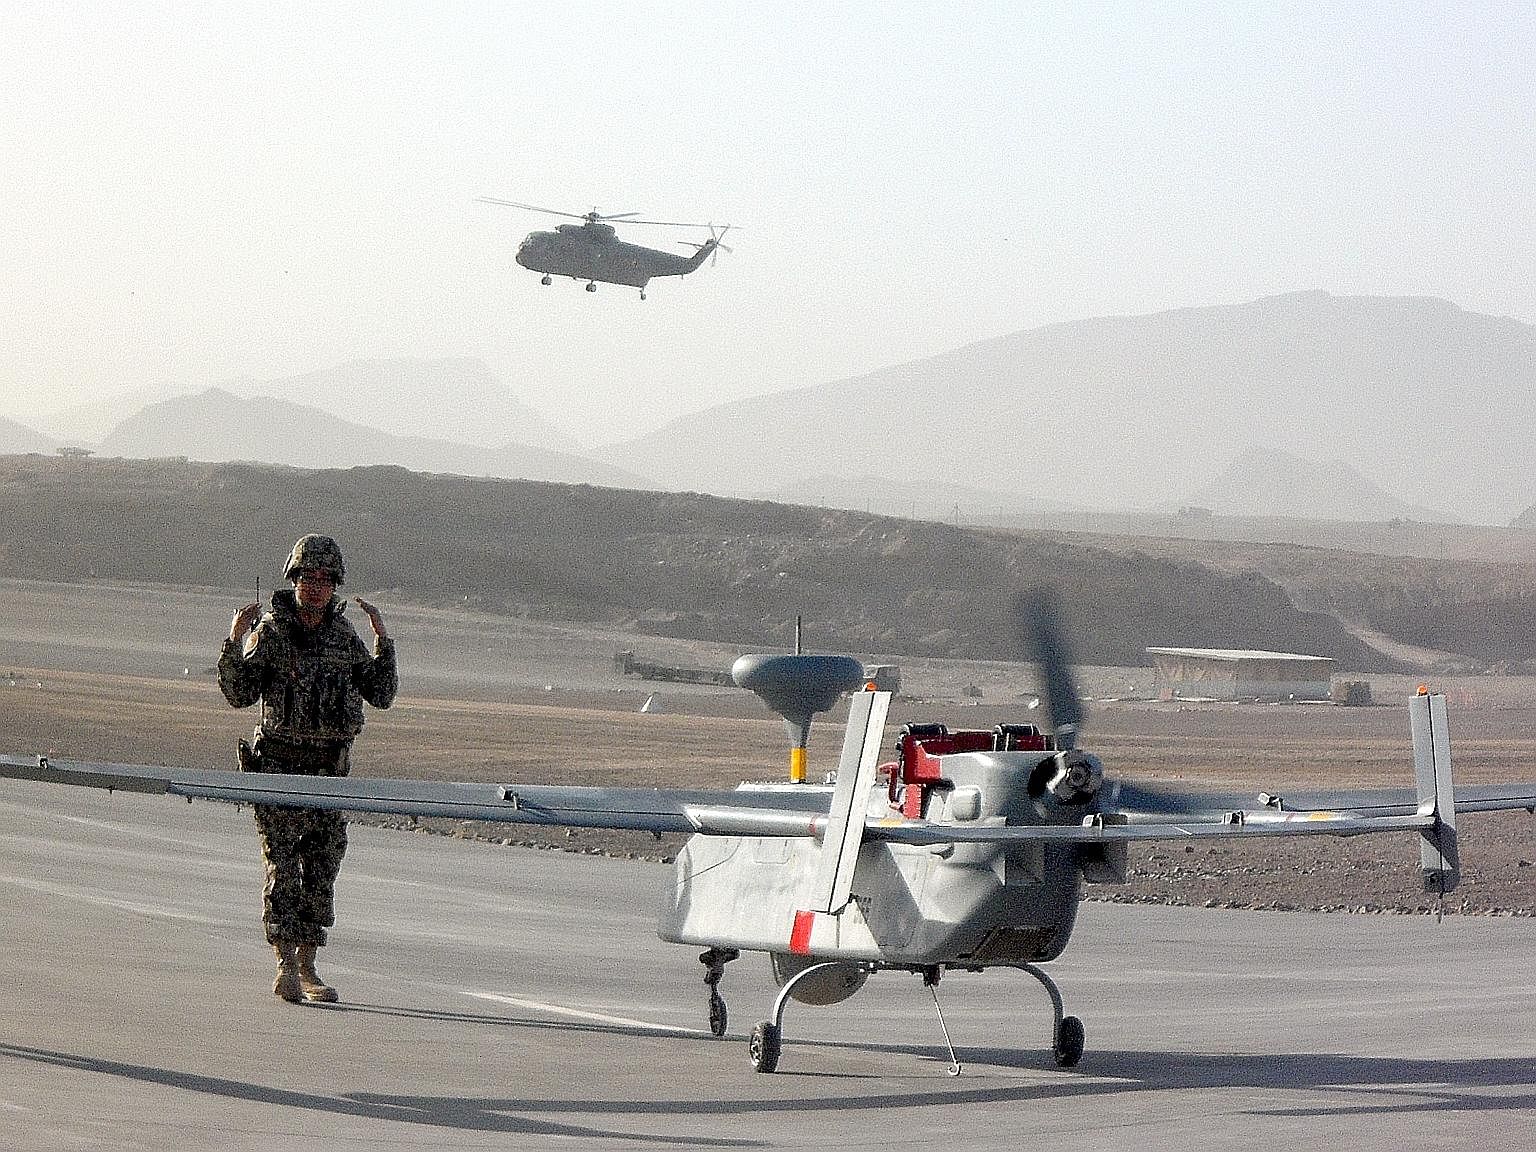 A Searcher UAV being prepared for take-off in Afghanistan. The RSAF's UAV team, which was deployed in the war zone from August to November 2010, was tasked with providing surveillance and reconnaissance for international forces there.